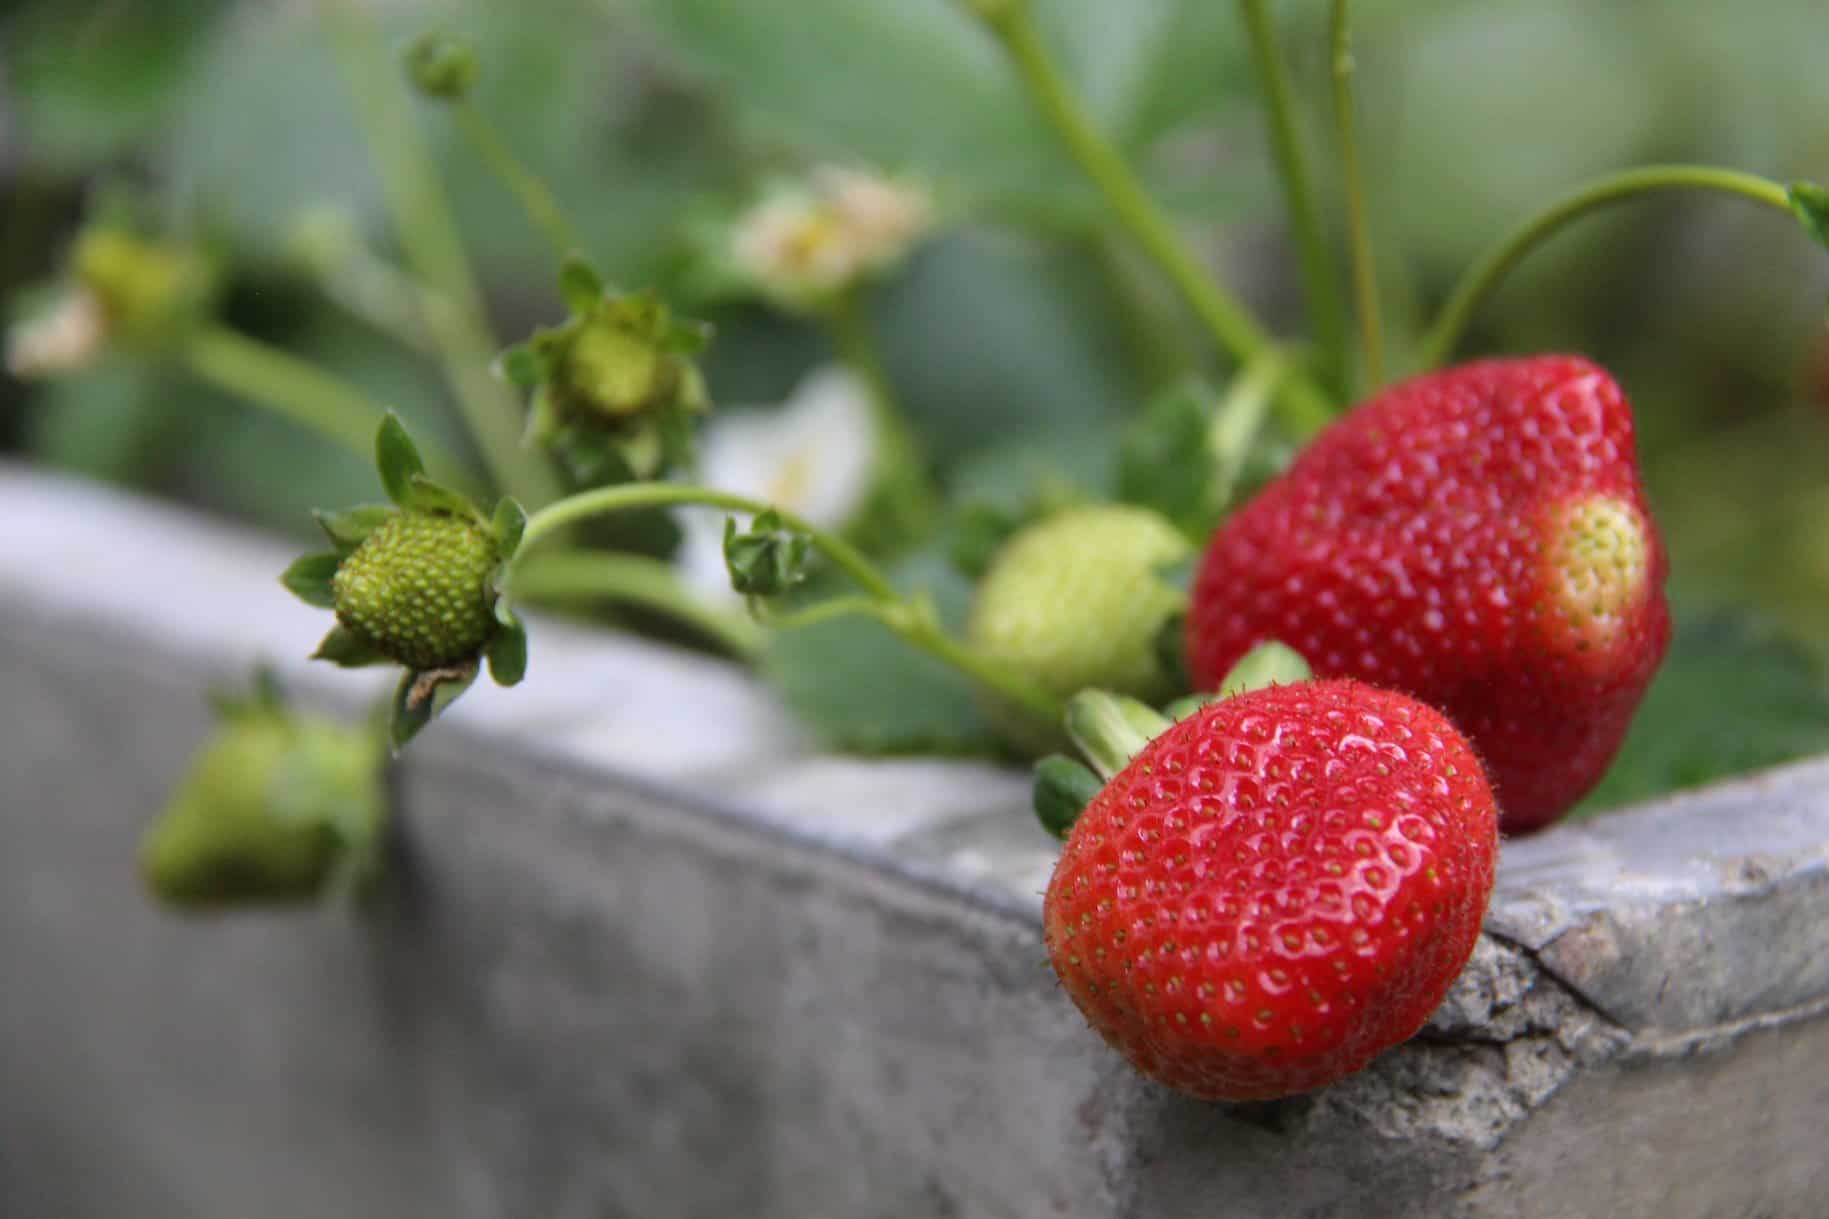 container gardening instructions for how to grow strawberries from seeds